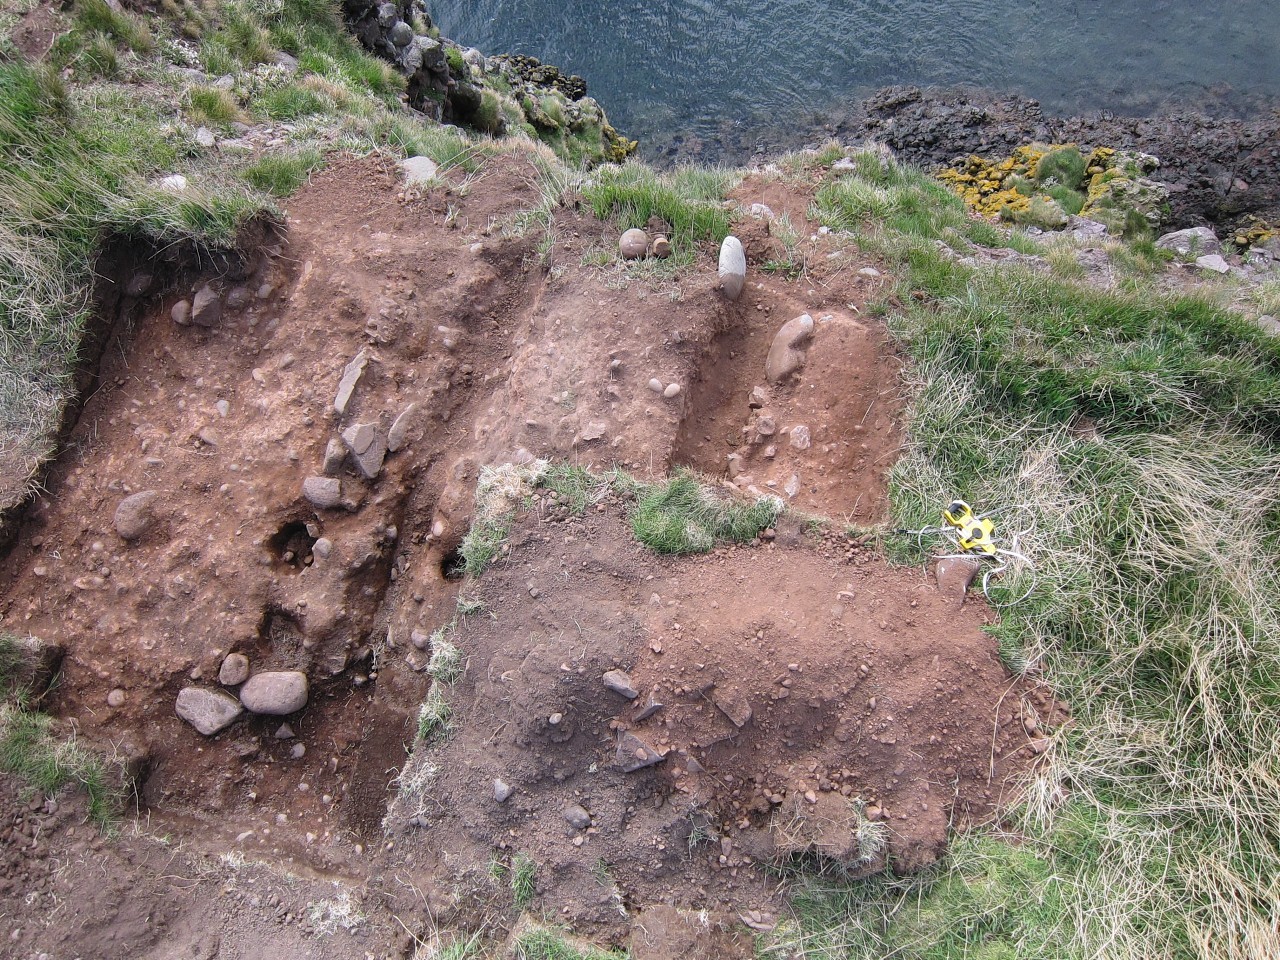 It may not look like much, but archaeologists learn a huge amount from their delicate work 